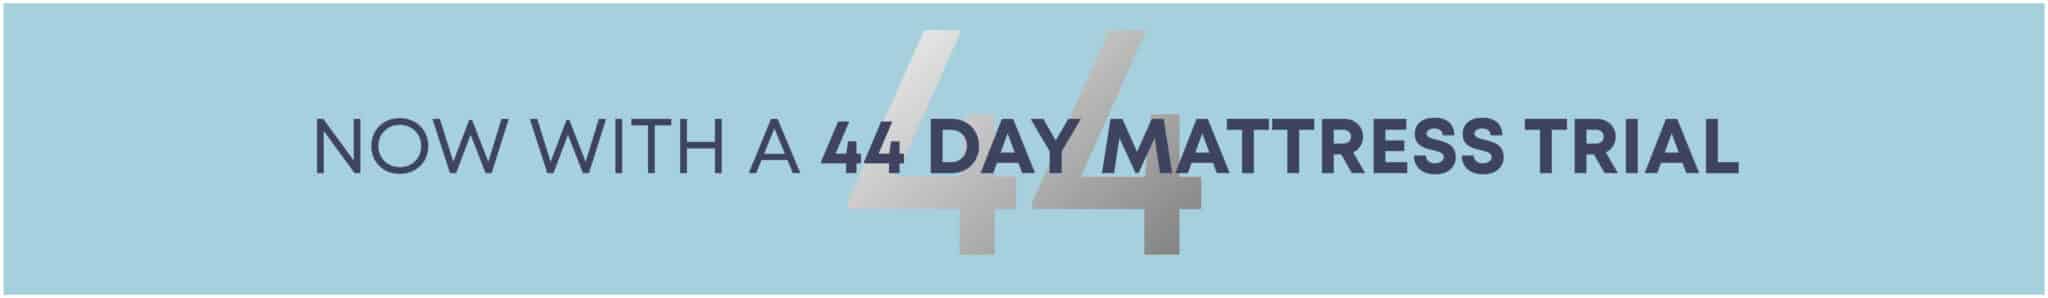 now with a 44 day mattress trial banner